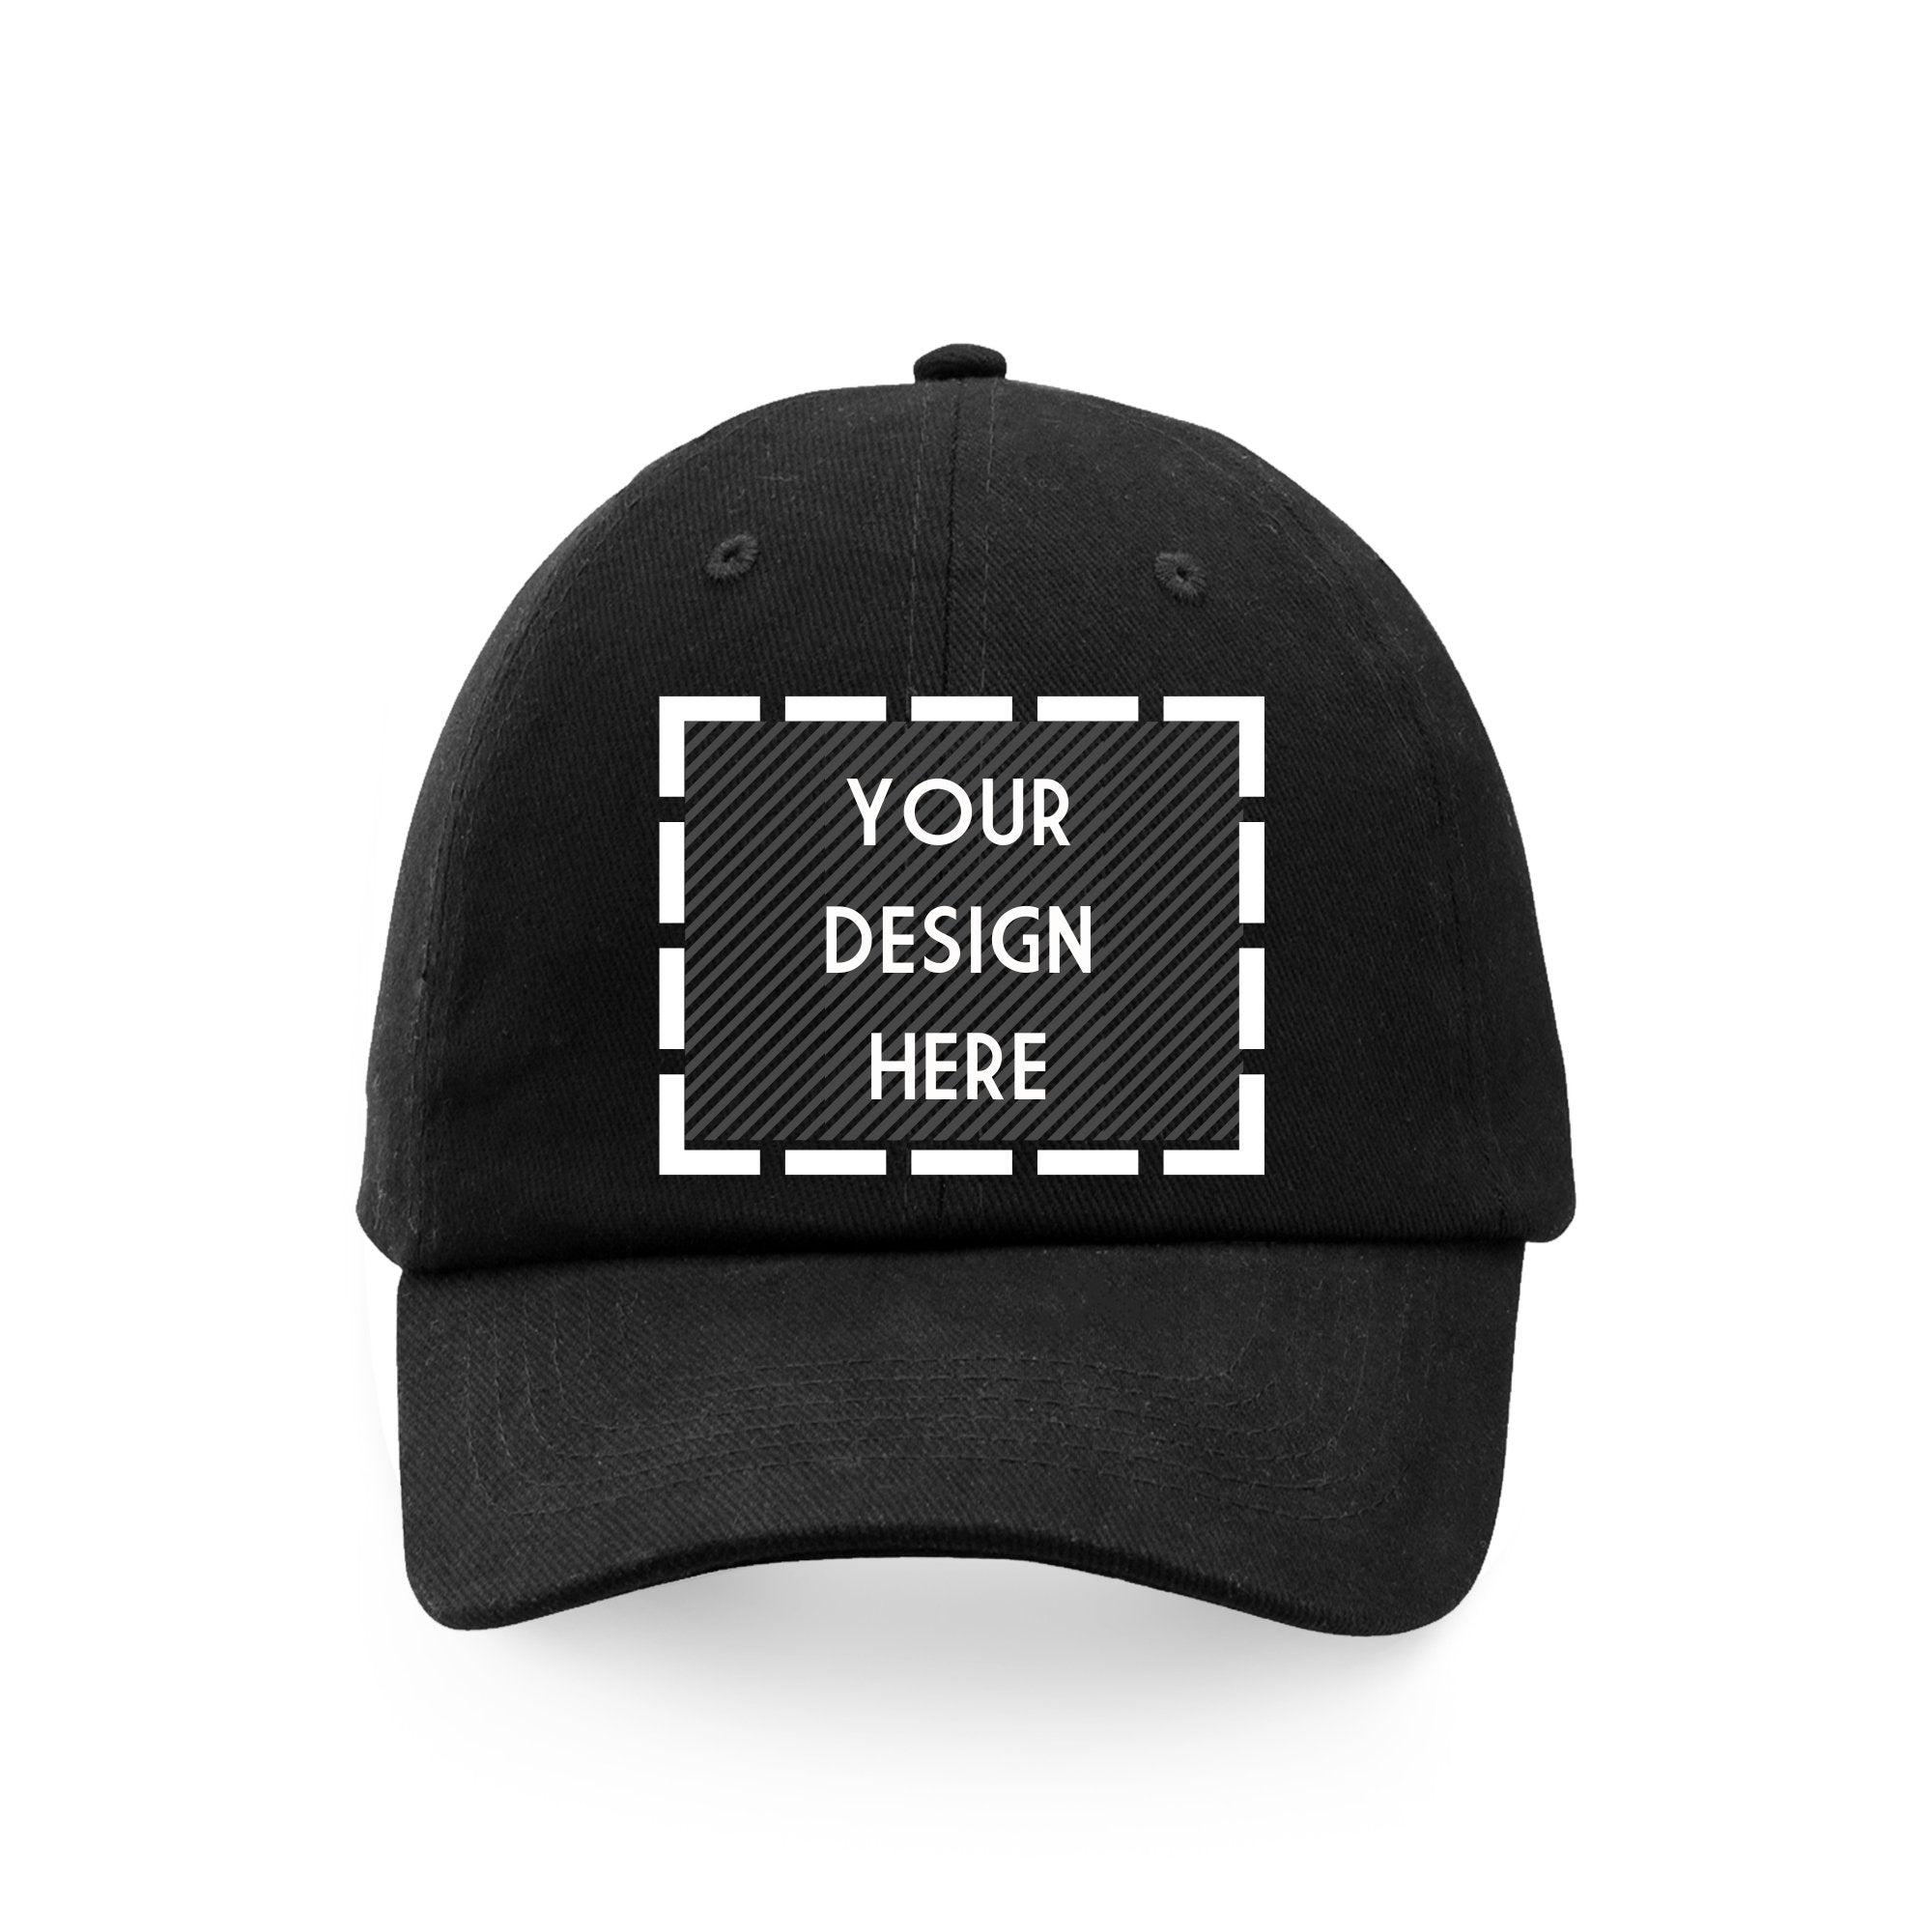 A black baseball hat with a customizable area on the front